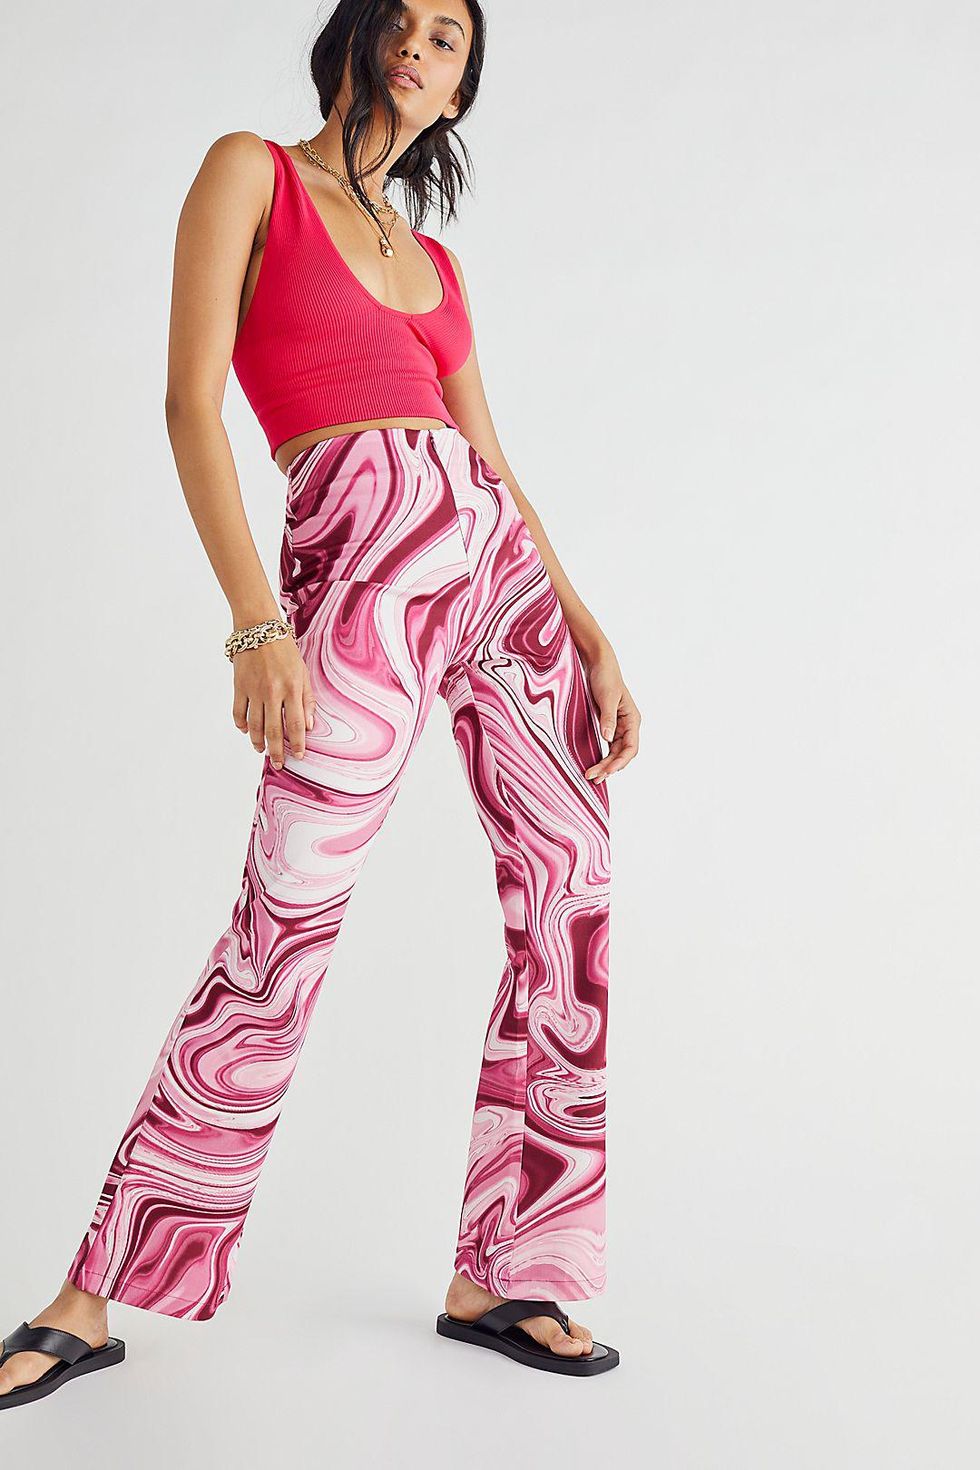 Printed Pants Fall Fashion Trend — For Your Wardrobe - Brit + Co